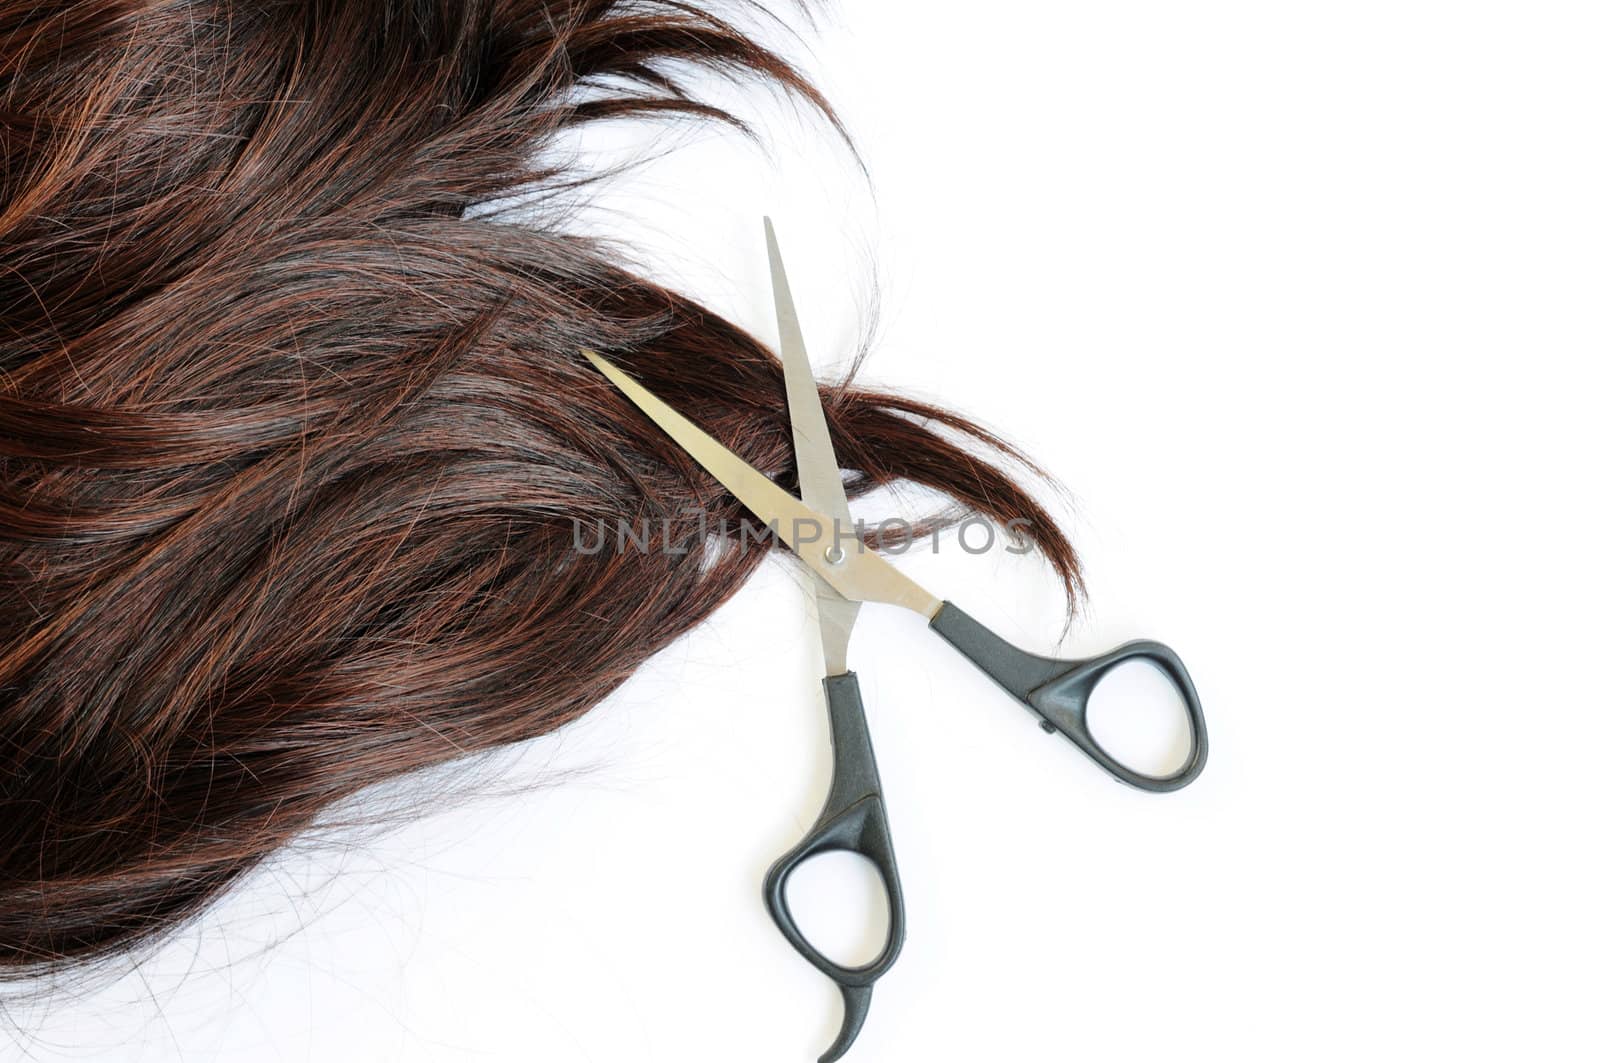 Brown hair and scissors on a white background